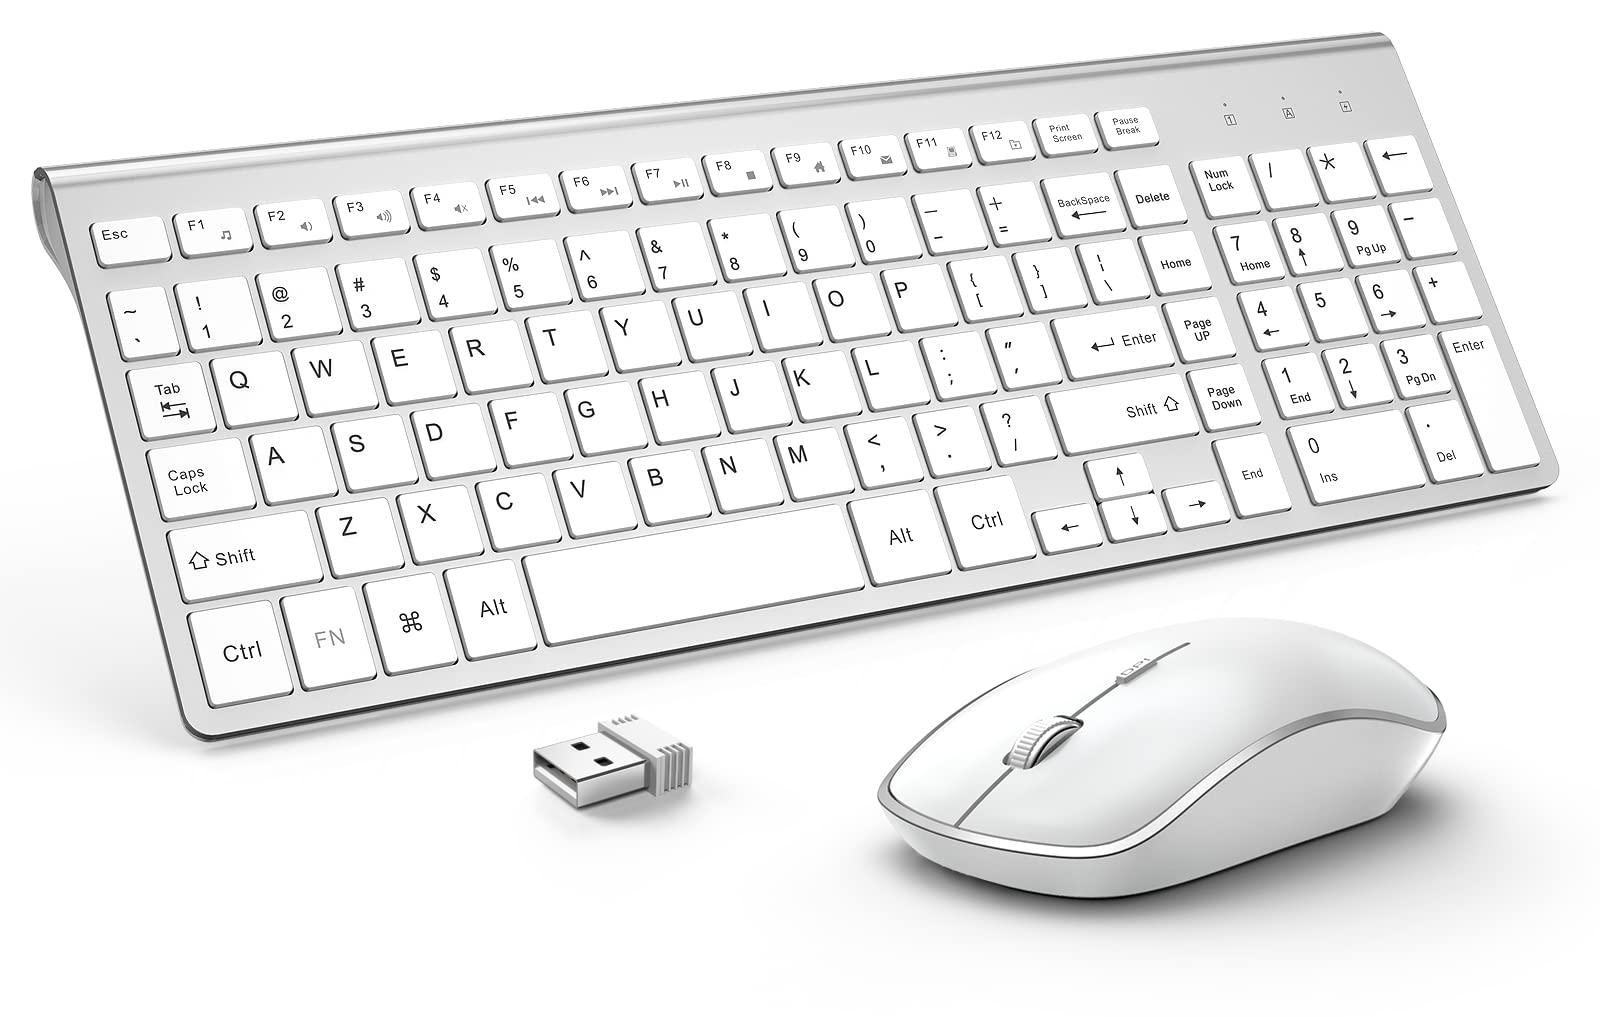 Wireless Keyboard and Mouse, J JOYACCESS USB Slim Wireless Keyboard Mouse with Numeric Keypad Compatible with iMac Mac PC Laptop Tablet Computer Windows (Silver White)
